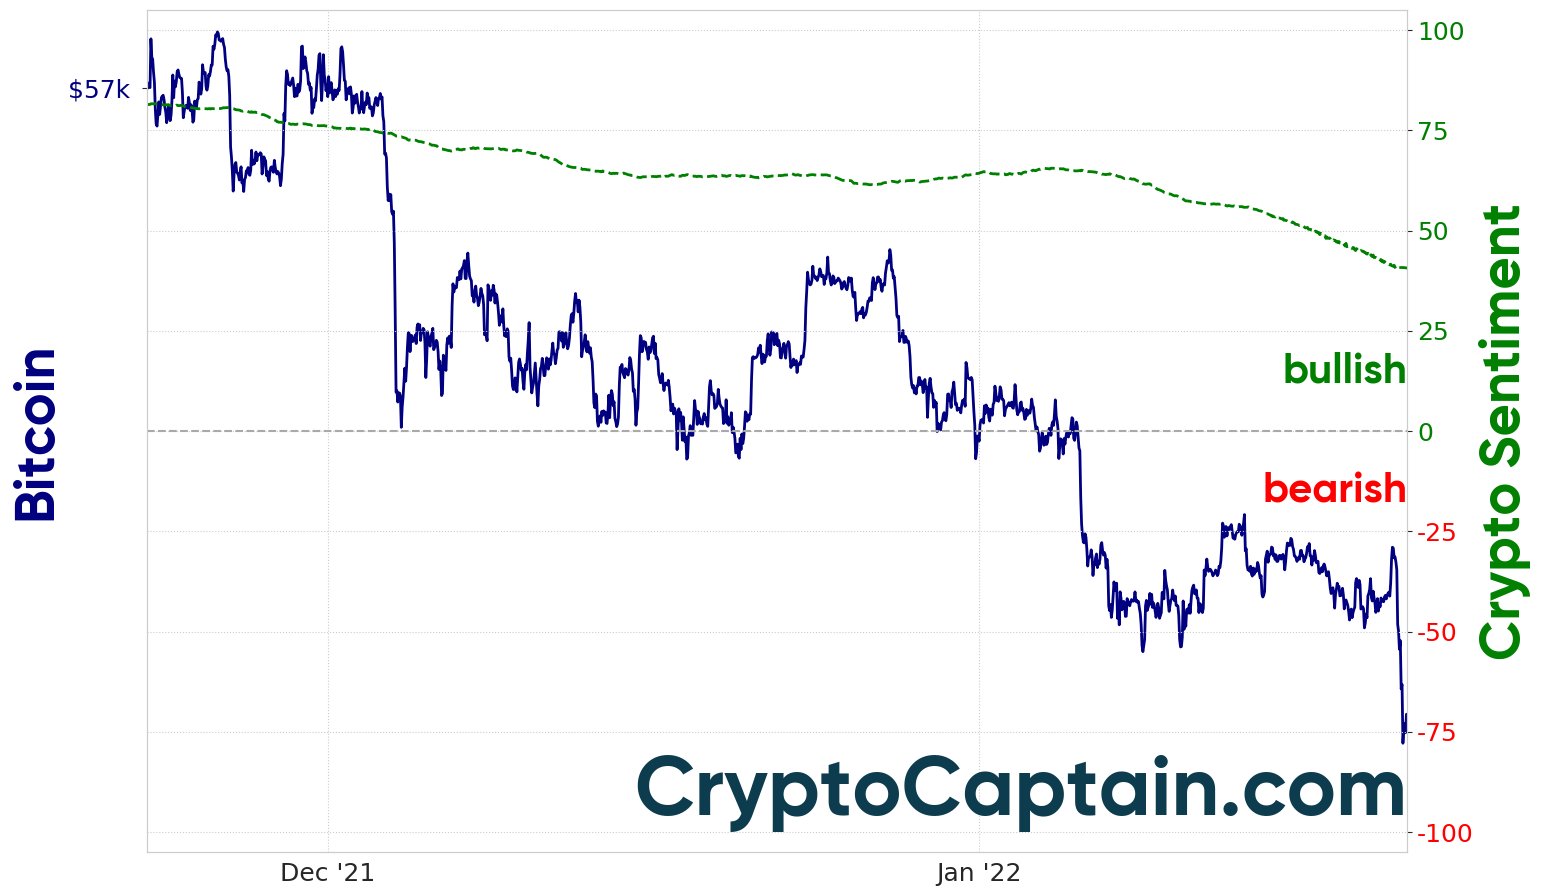 Crypto market sentiment with a long time horizon